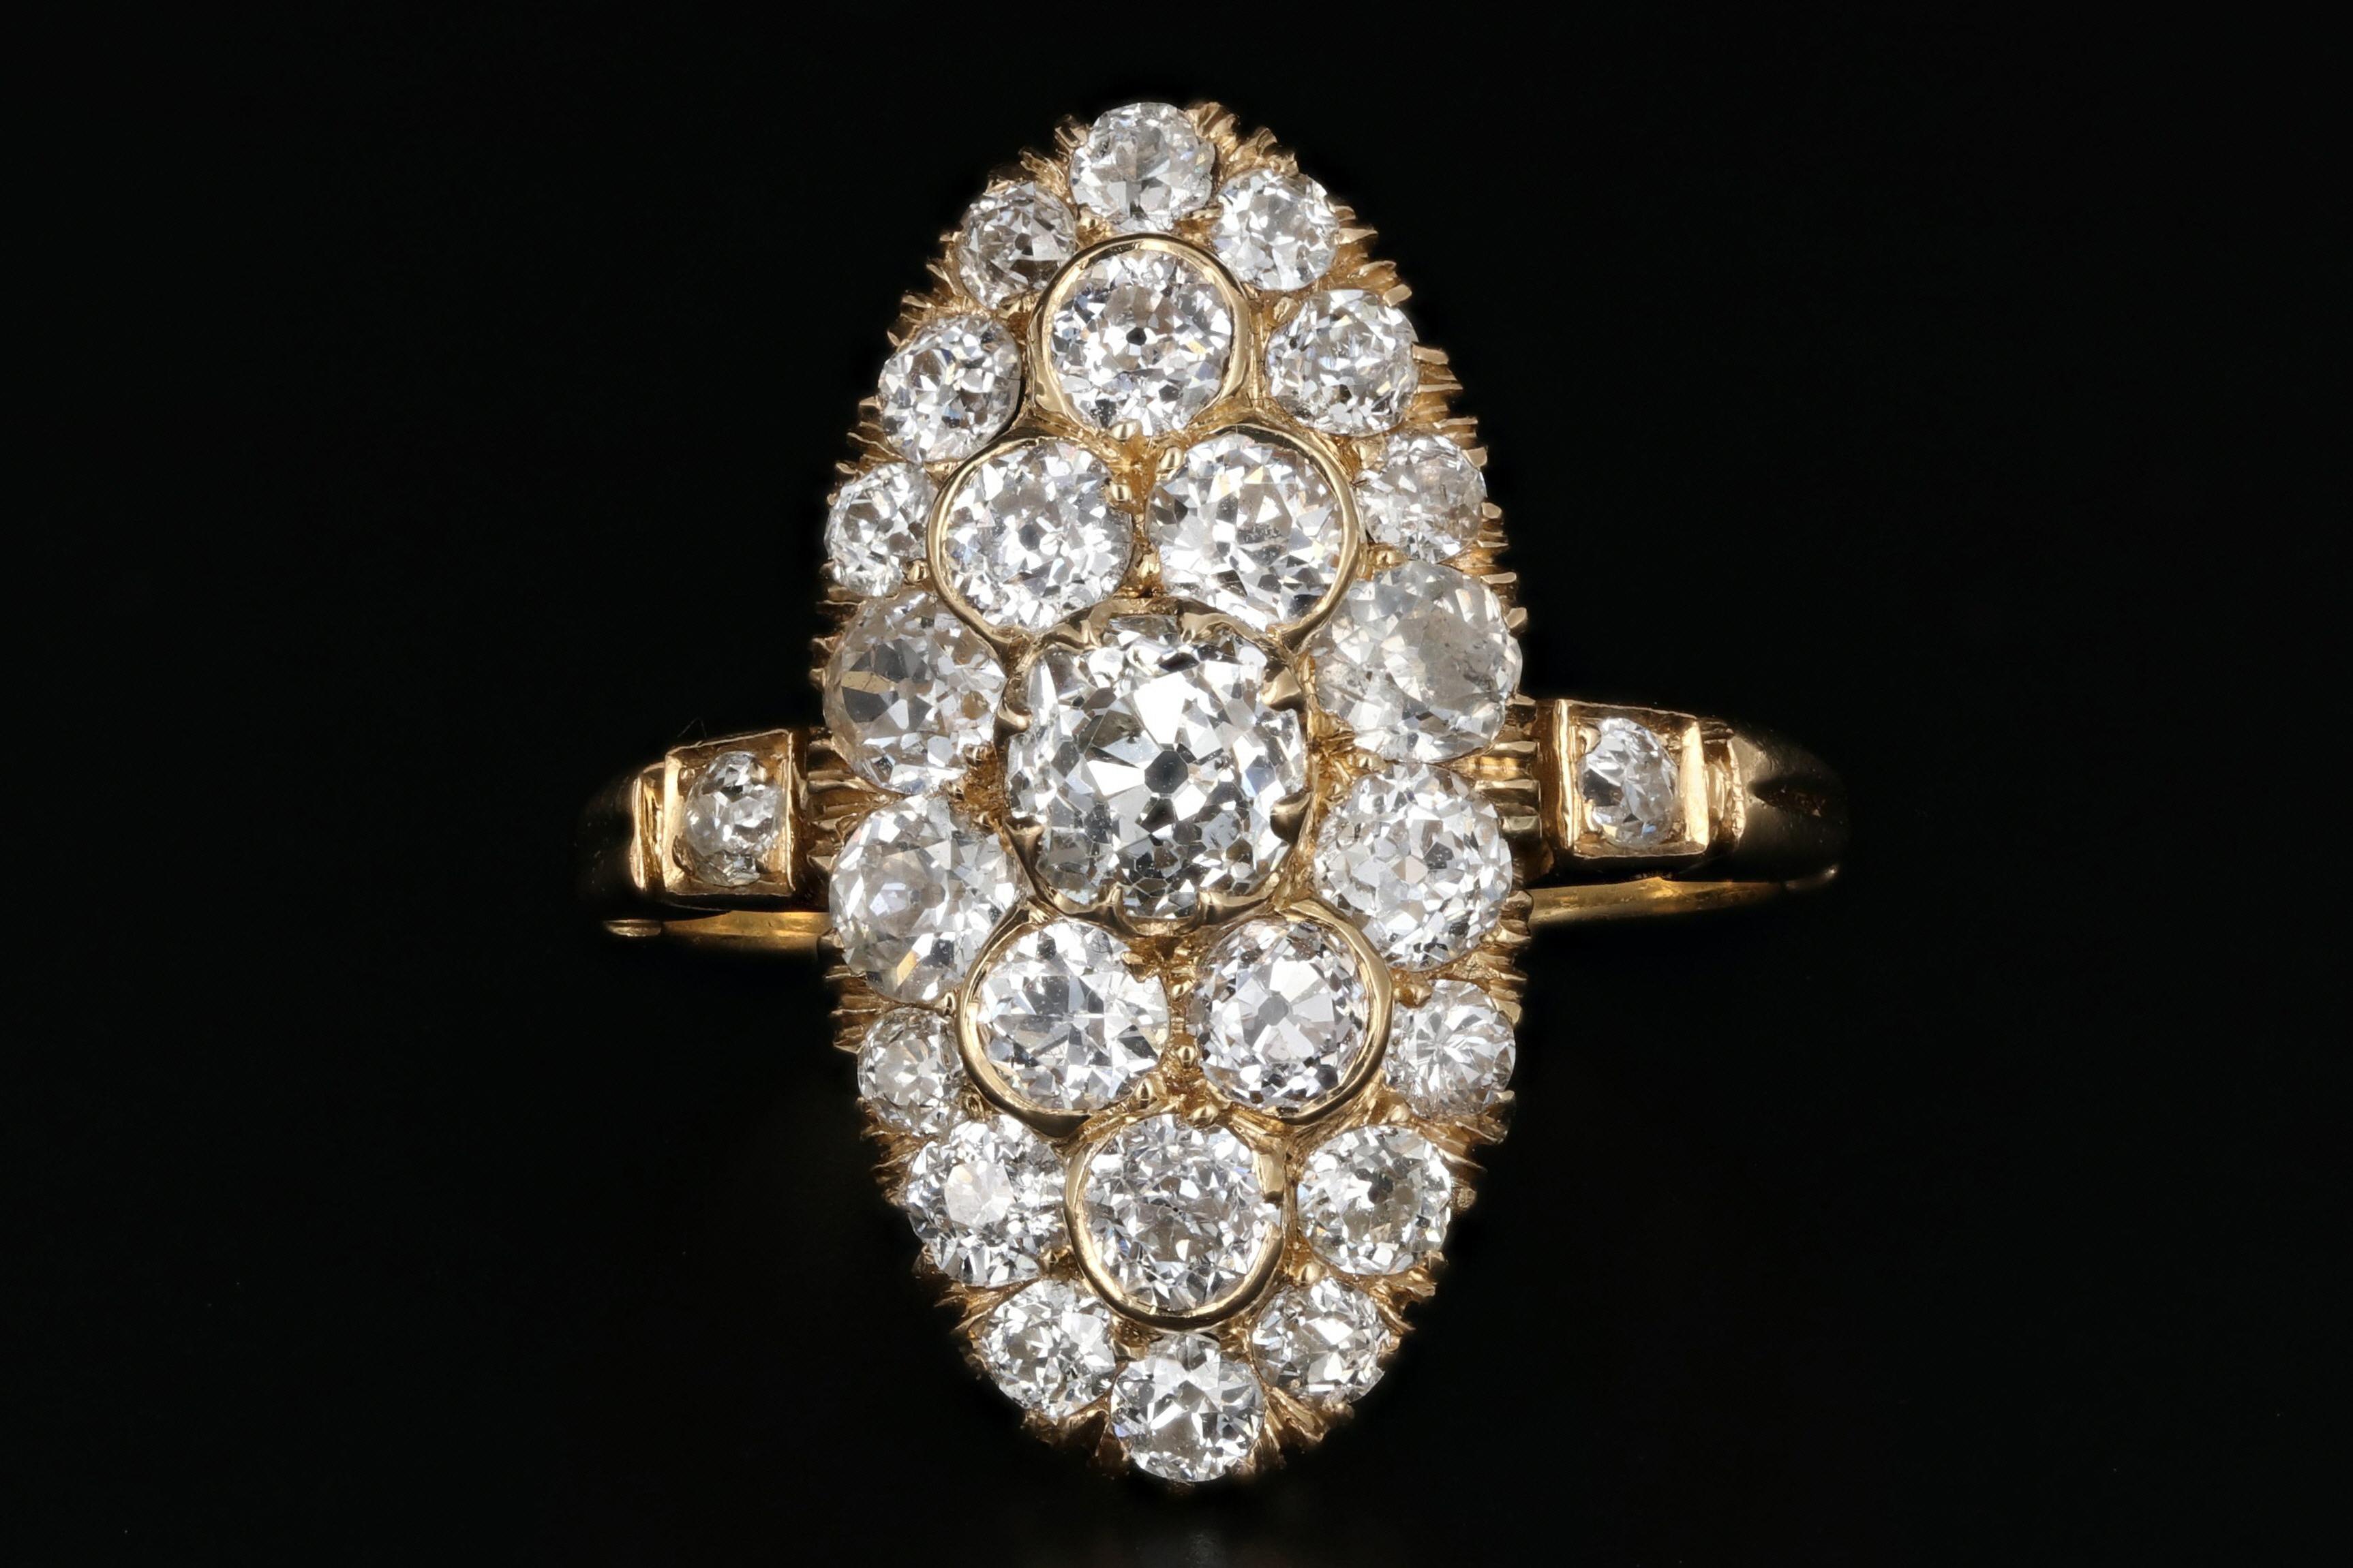 Era: Victorian

Composition: 18K Yellow Gold

Primary Stone: Old Mine Cut Diamond

Stone Carat Weight: .53 Carats

Color/ Clarity: J/SI2

Accent Stone: Old European Cut Diamonds

Accent Stone Carat Weight: 1.80 Carats

Color/ Clarity: I/J,